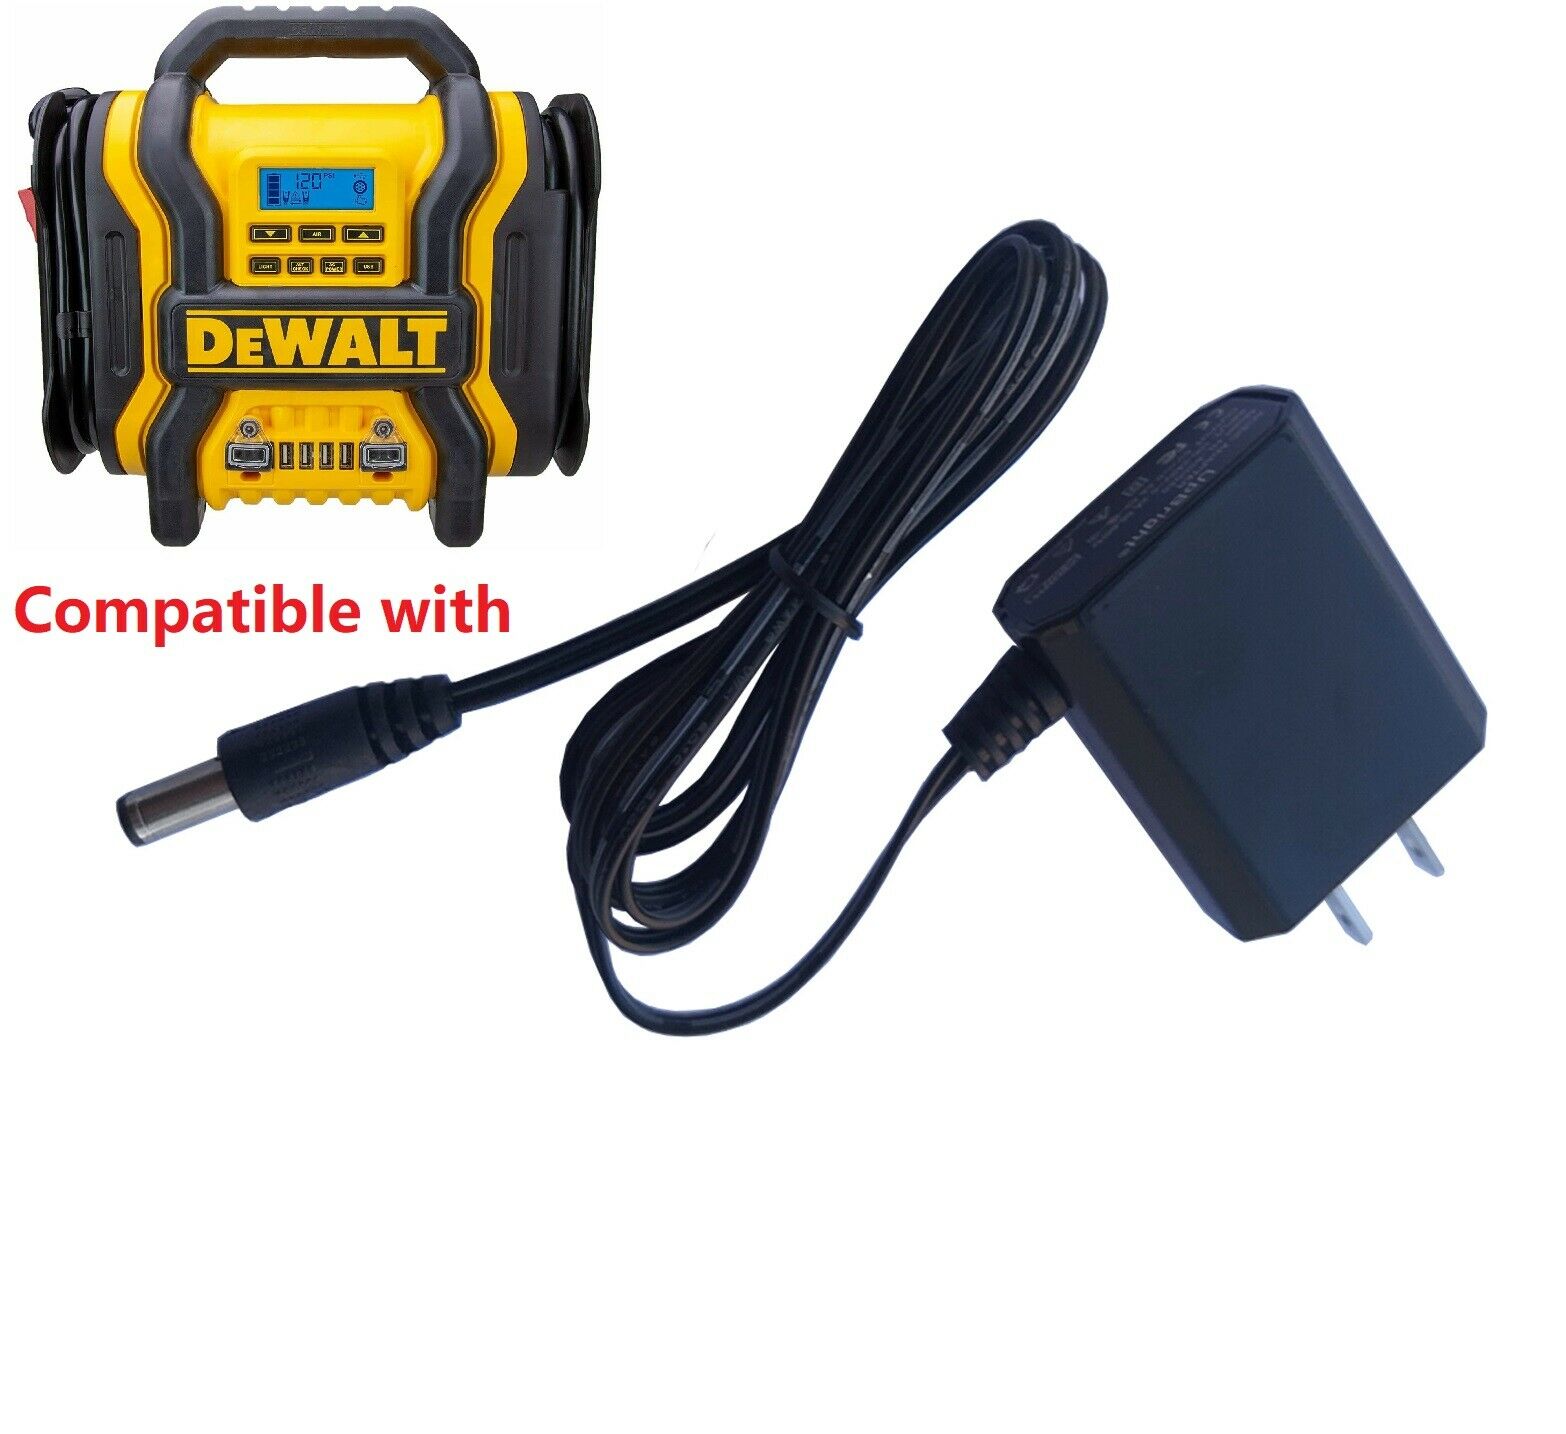 AC/DC Adapter Charger For Dewalt DXAEJ14 1400 Peak Amp Jump Starter Power Supply Specifications: Ty